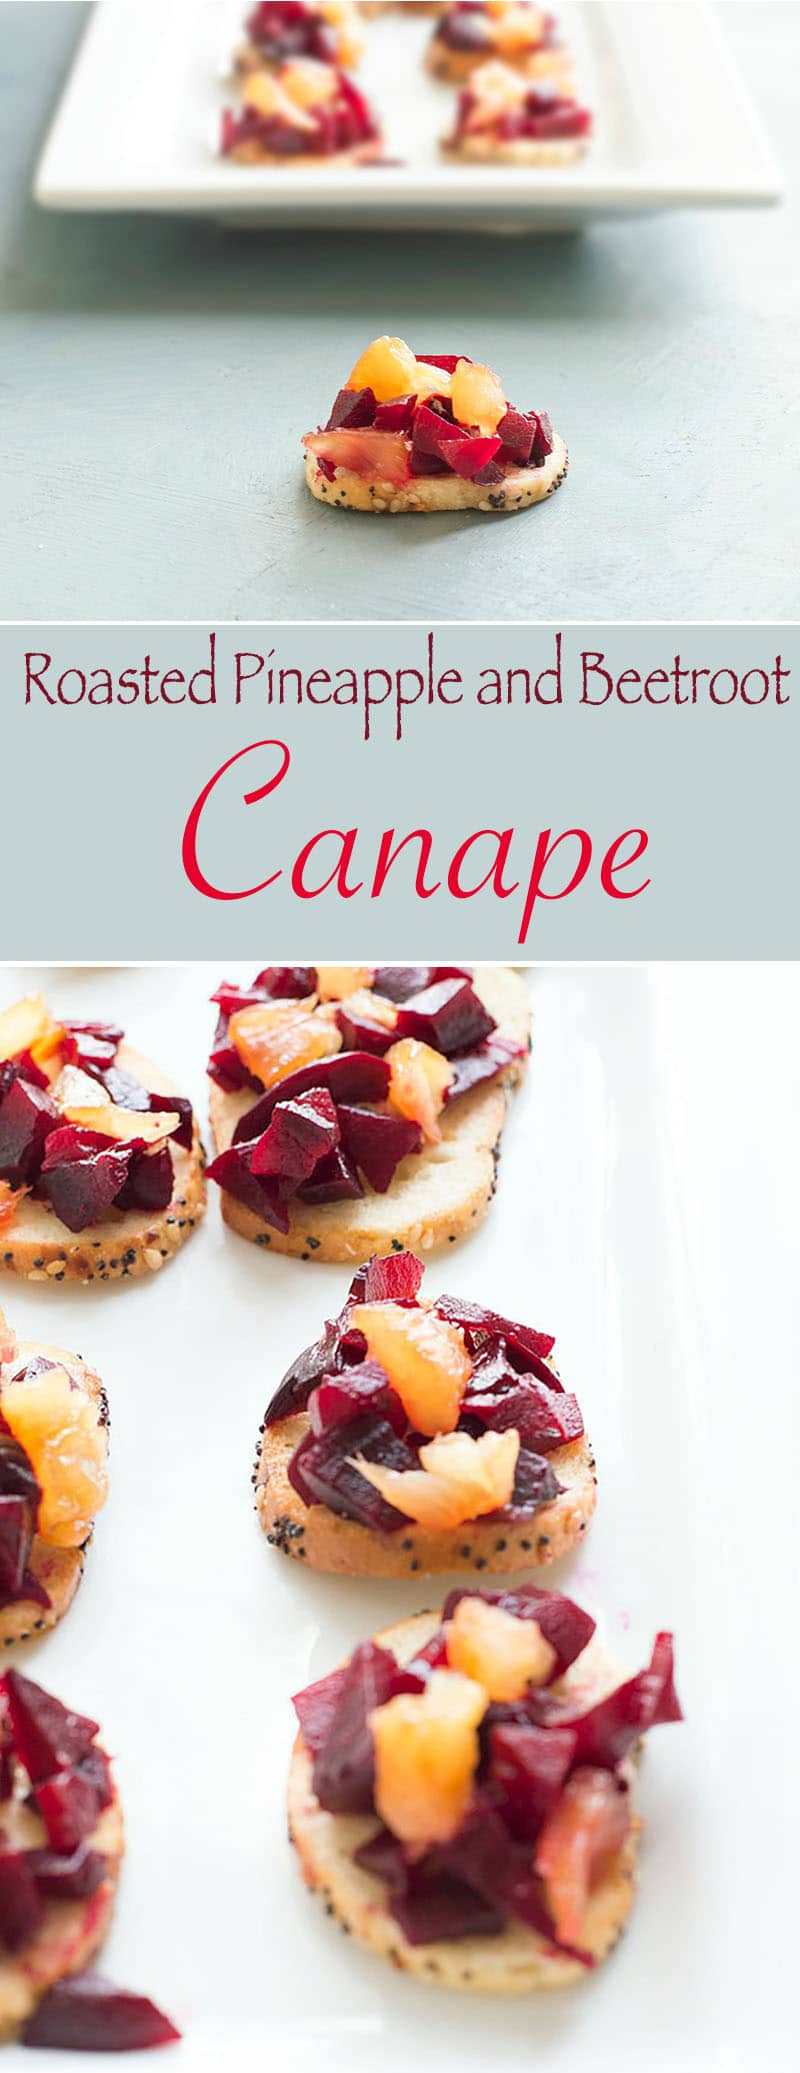 This beetroot canape with rum roasted pineapples is the perfect vegan appetizer recipe for any gathering. Bagel bites make for a very strong base for the toppings